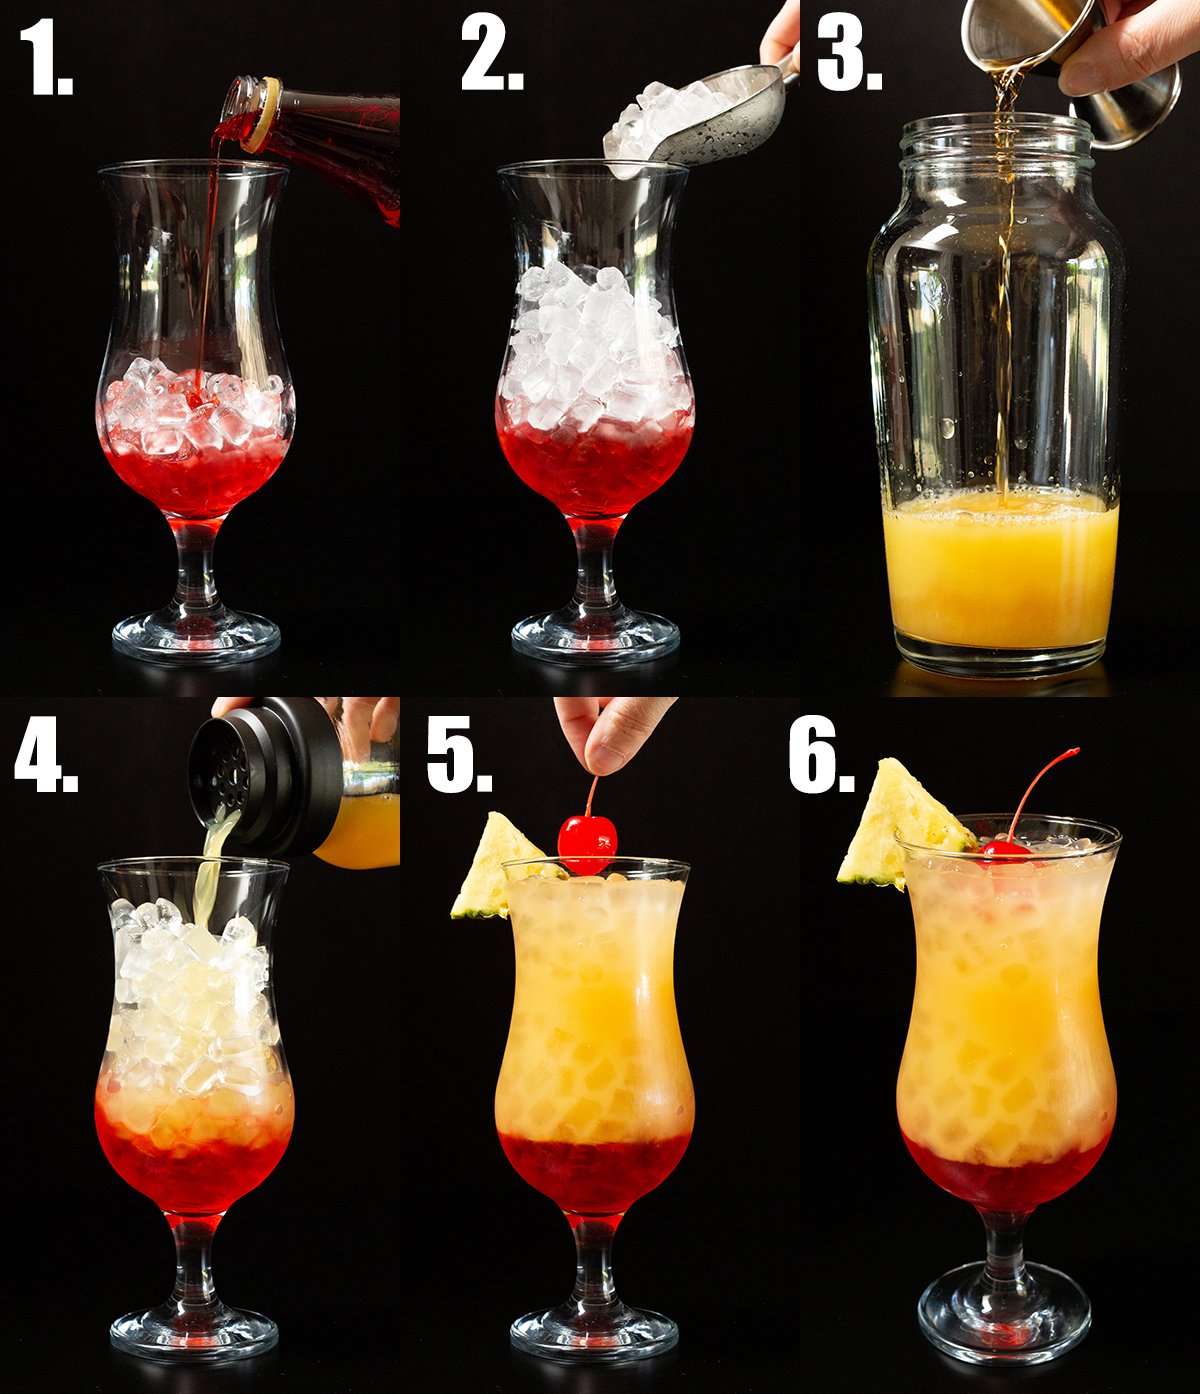 A photo collage showing the six steps to make a Bahama Momma.